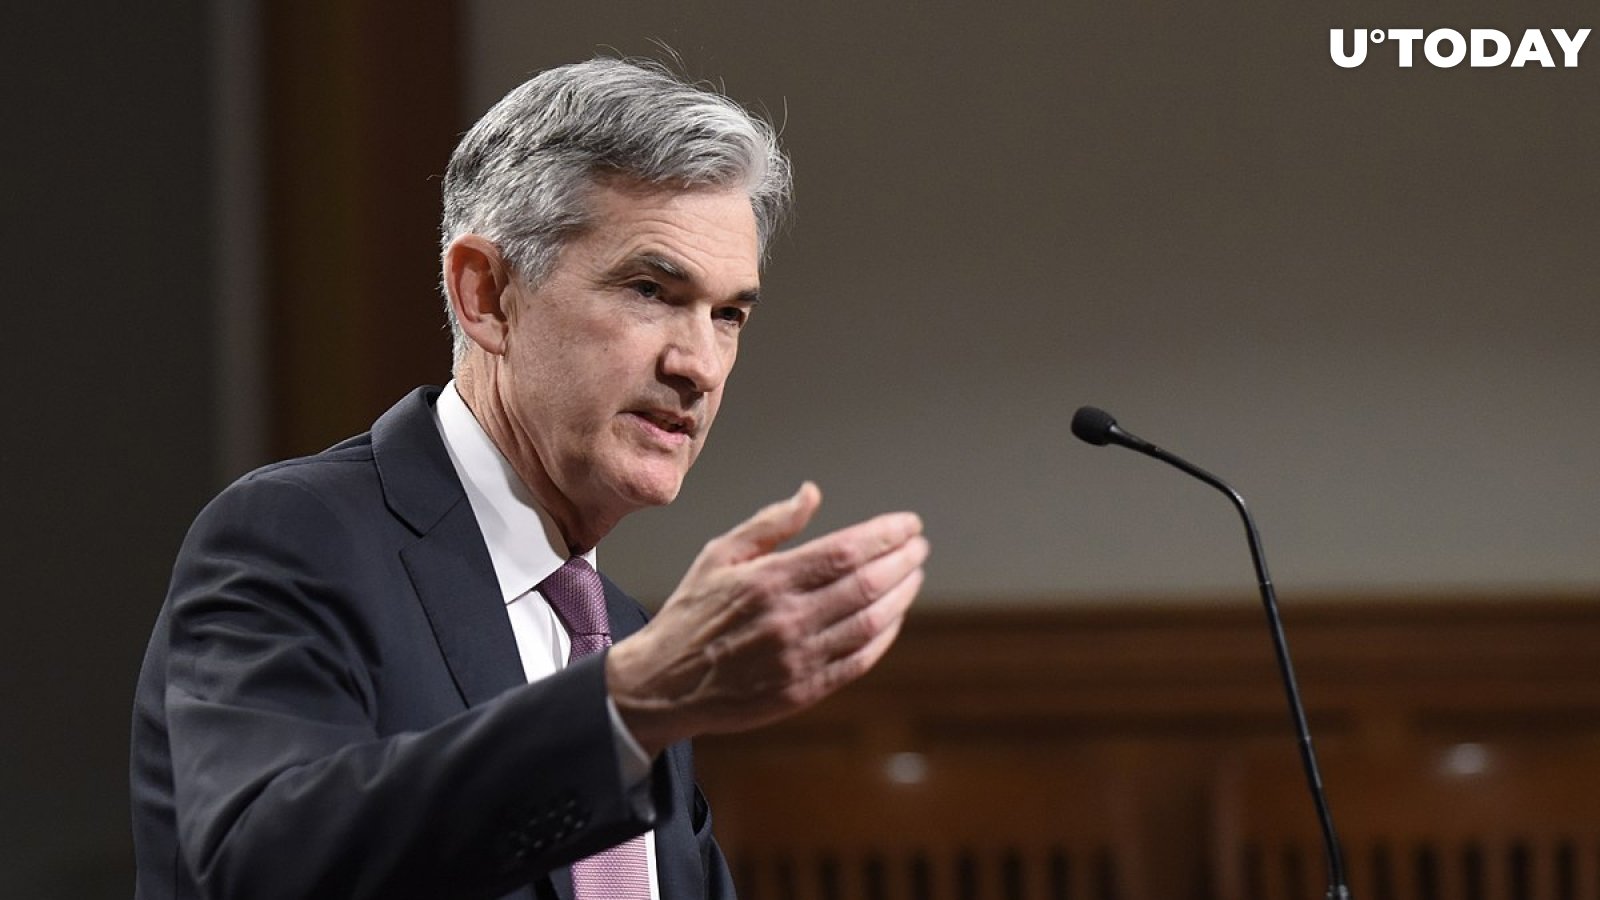 Bitcoin Pumping on Jerome Powell's Speech but Miners Might Spoil This Rally